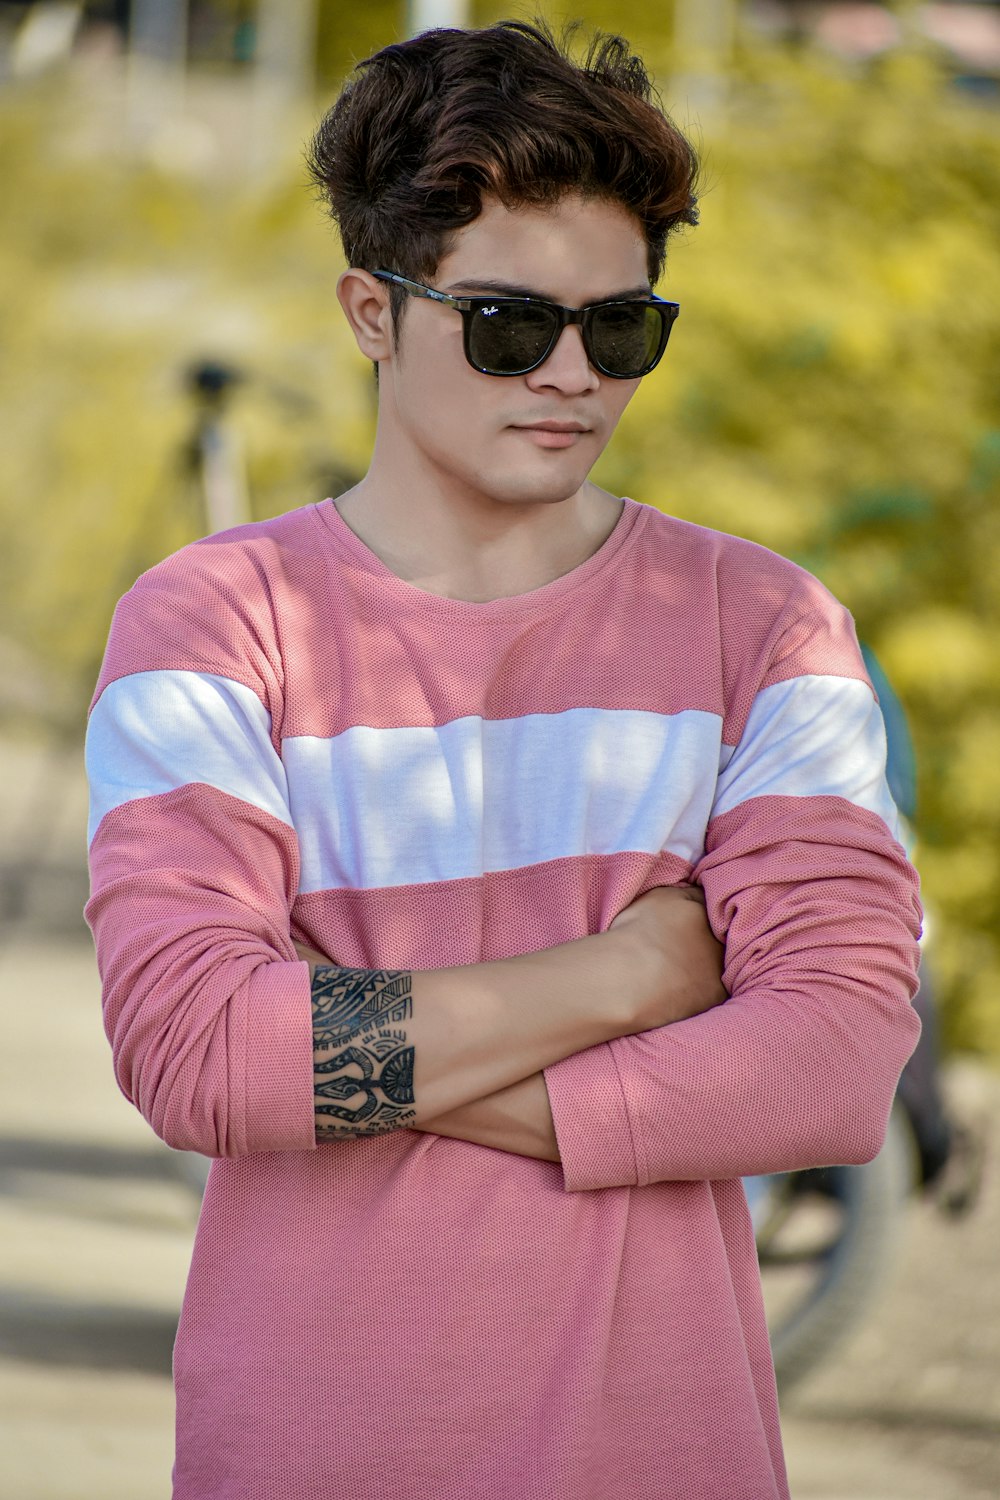 person wearing pink and white shirt